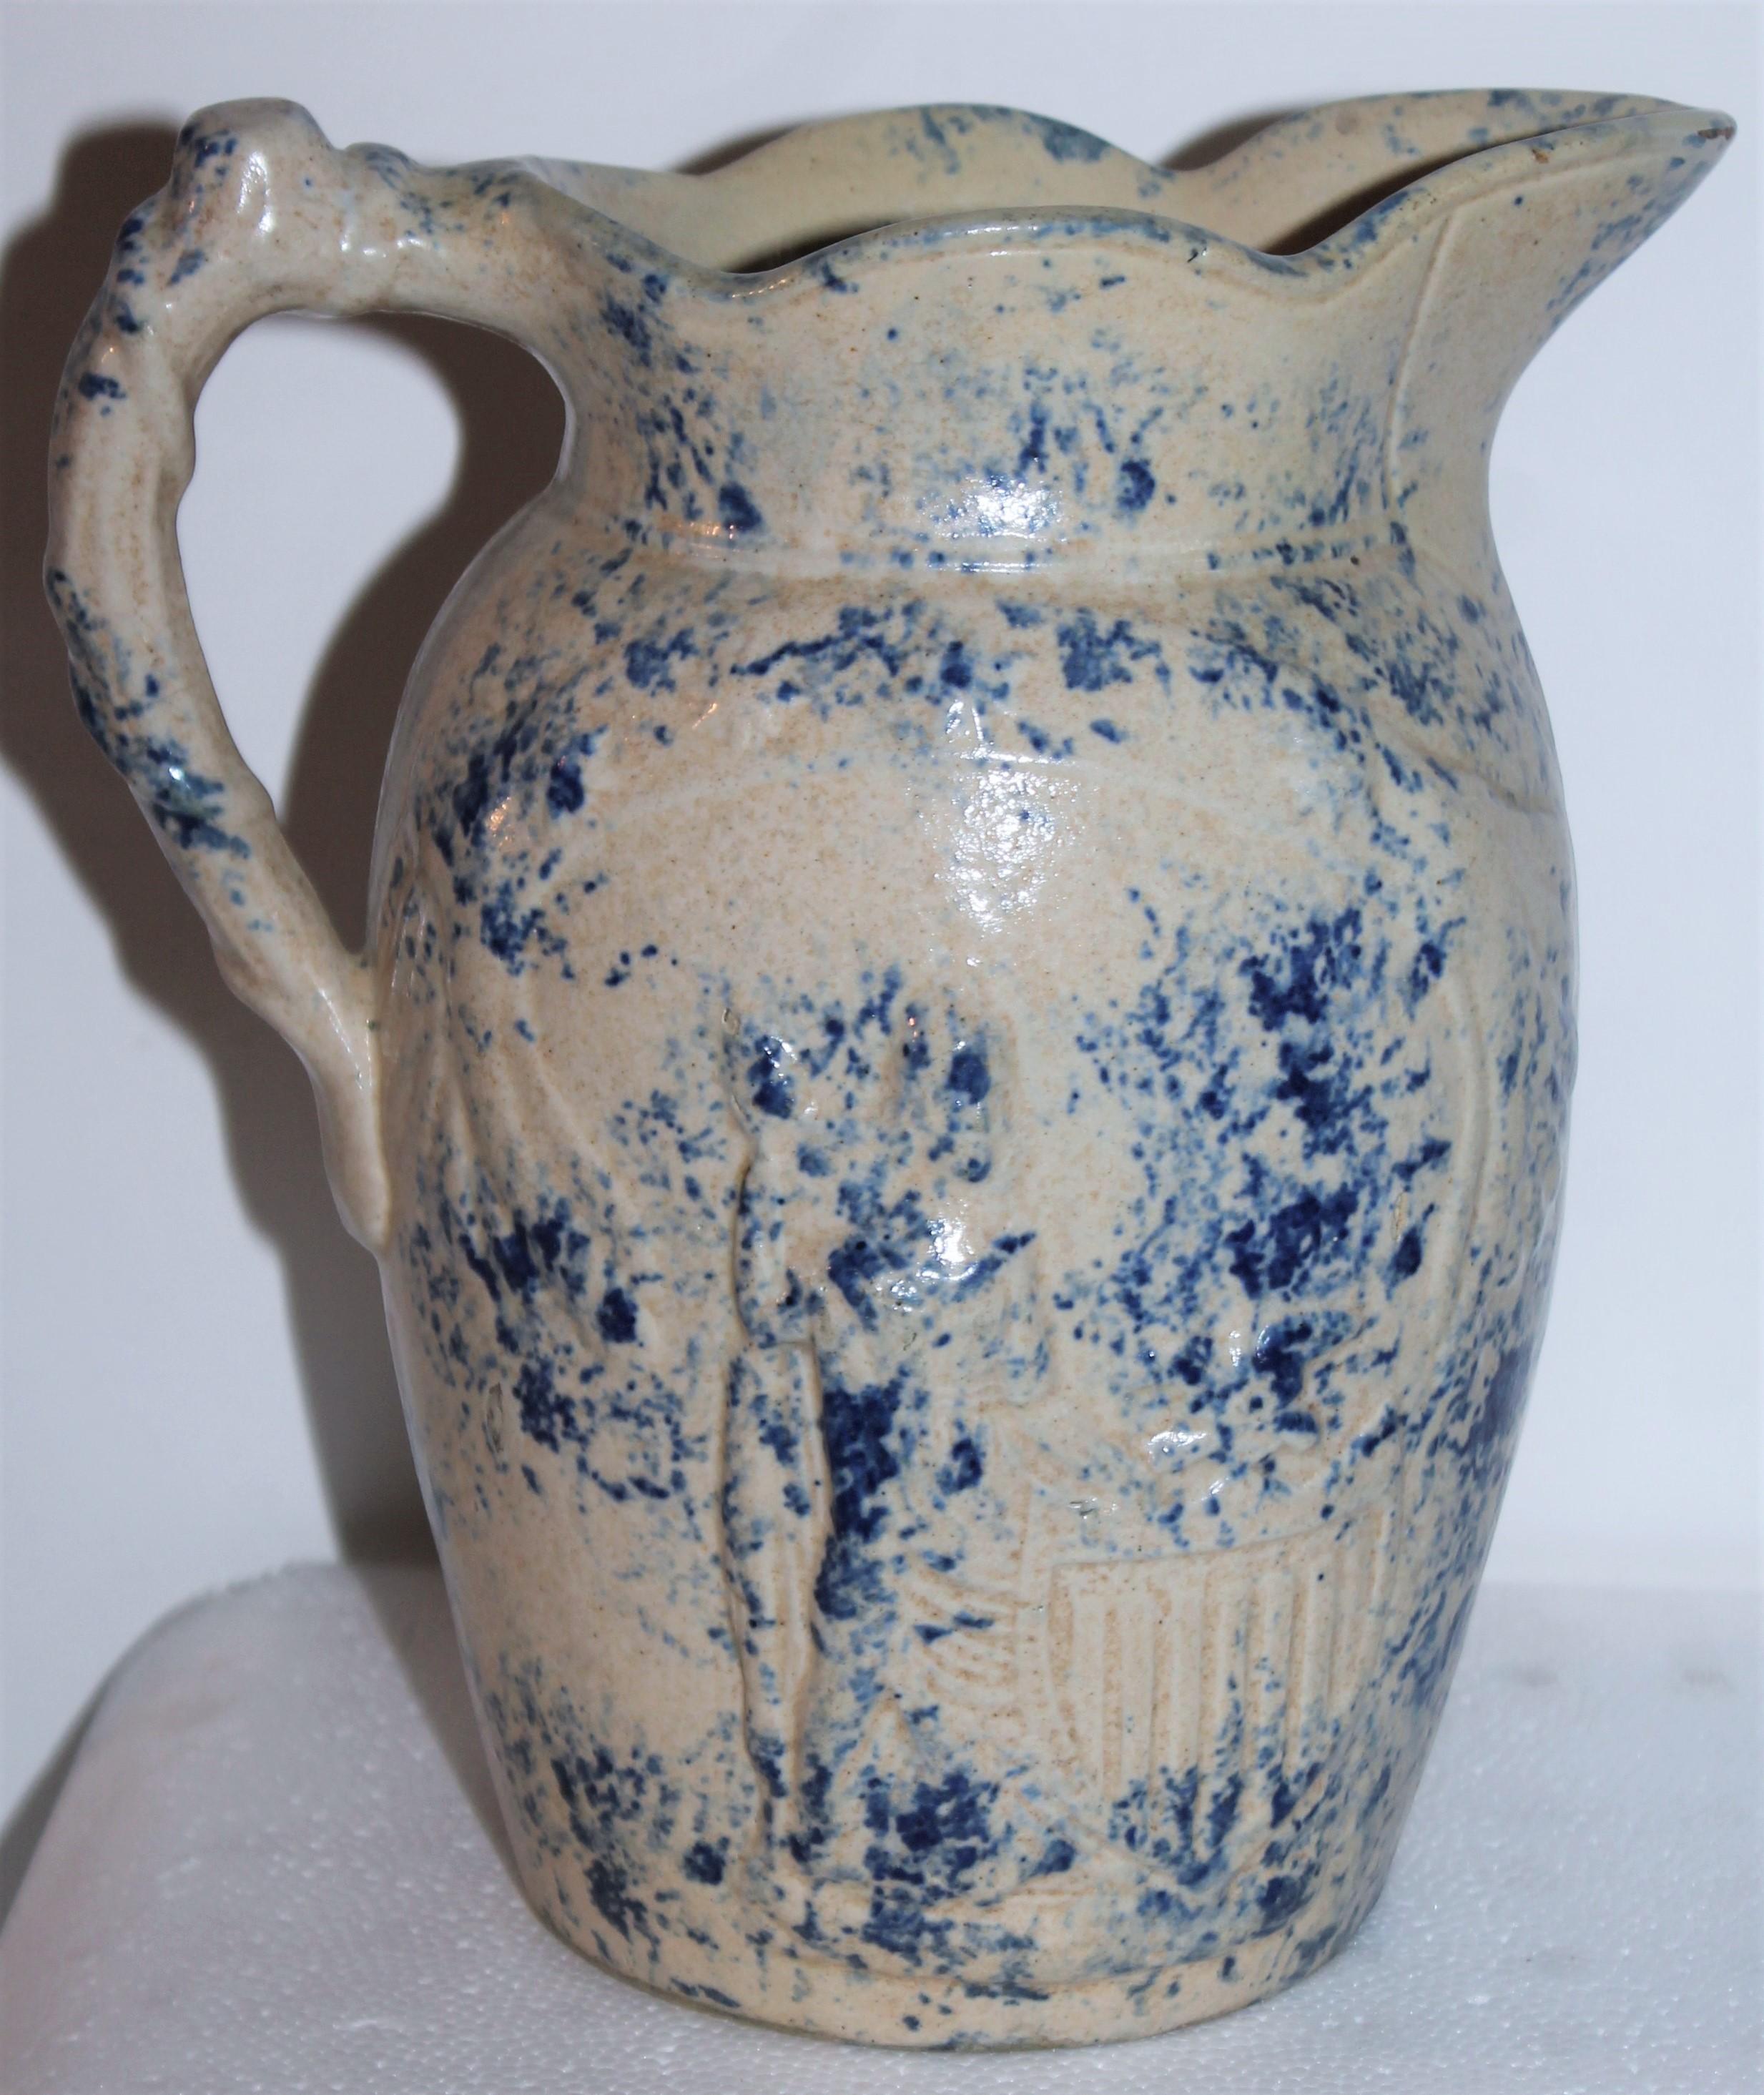 This fantastic rare lady liberty and shield embossed sponge pottery pitcher is in fine as found condition. She is embossed on both sides of the stoneware pitcher. It has a spotted design sponge pattern.